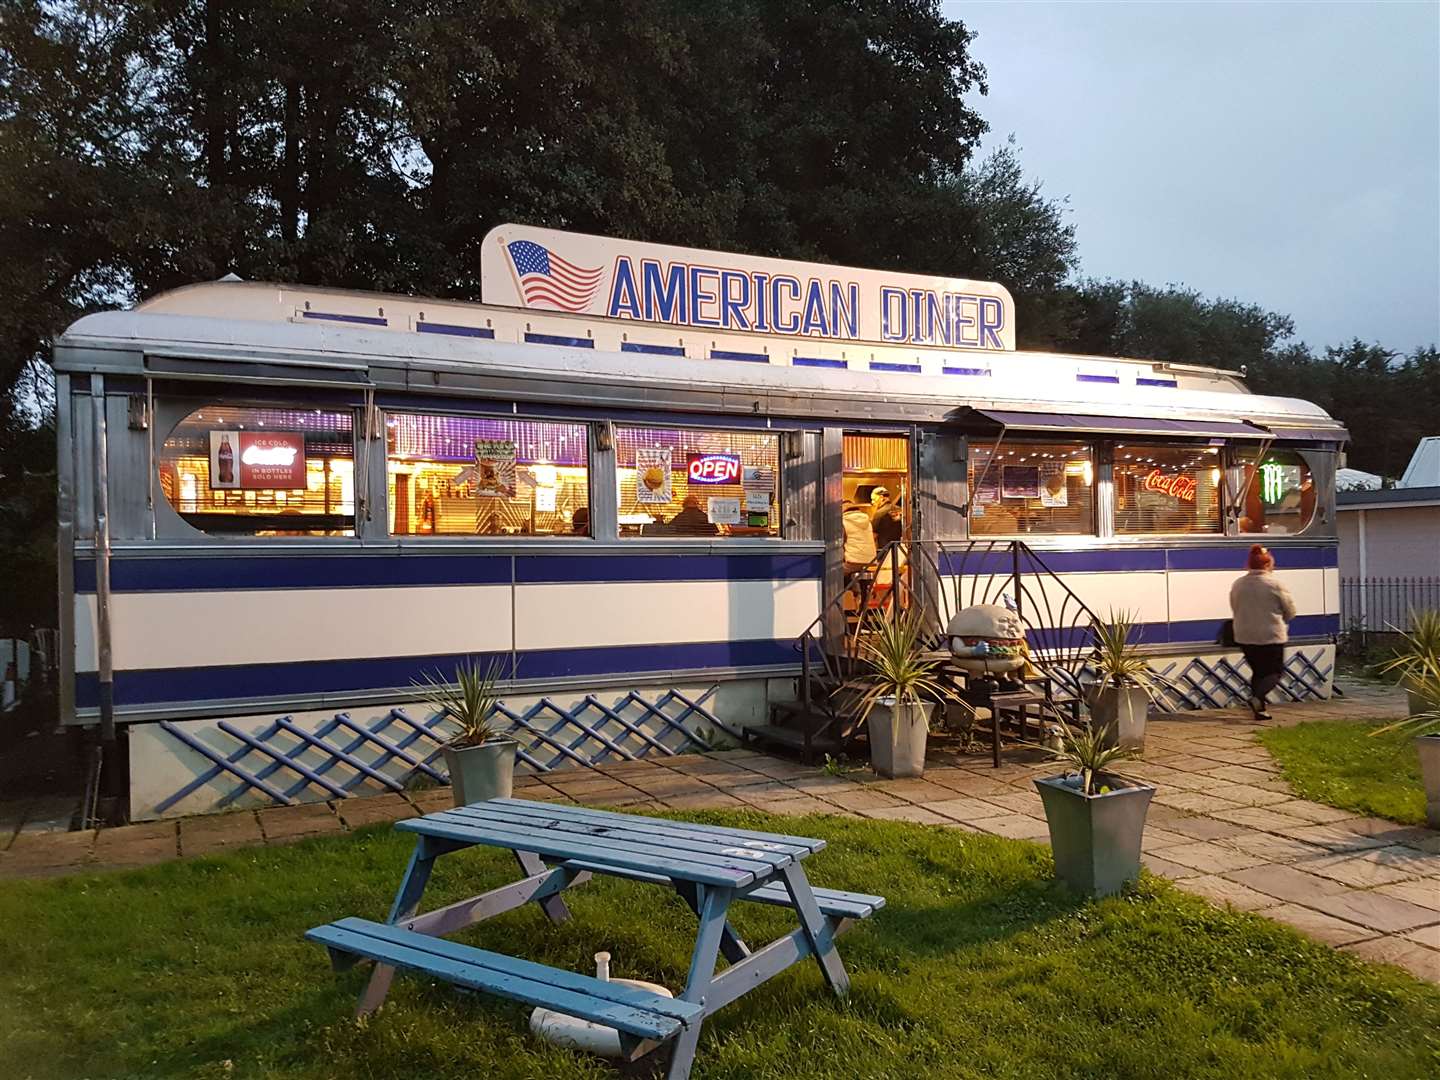 The former American Diner at its home in Longacres' Bybrook Barn location